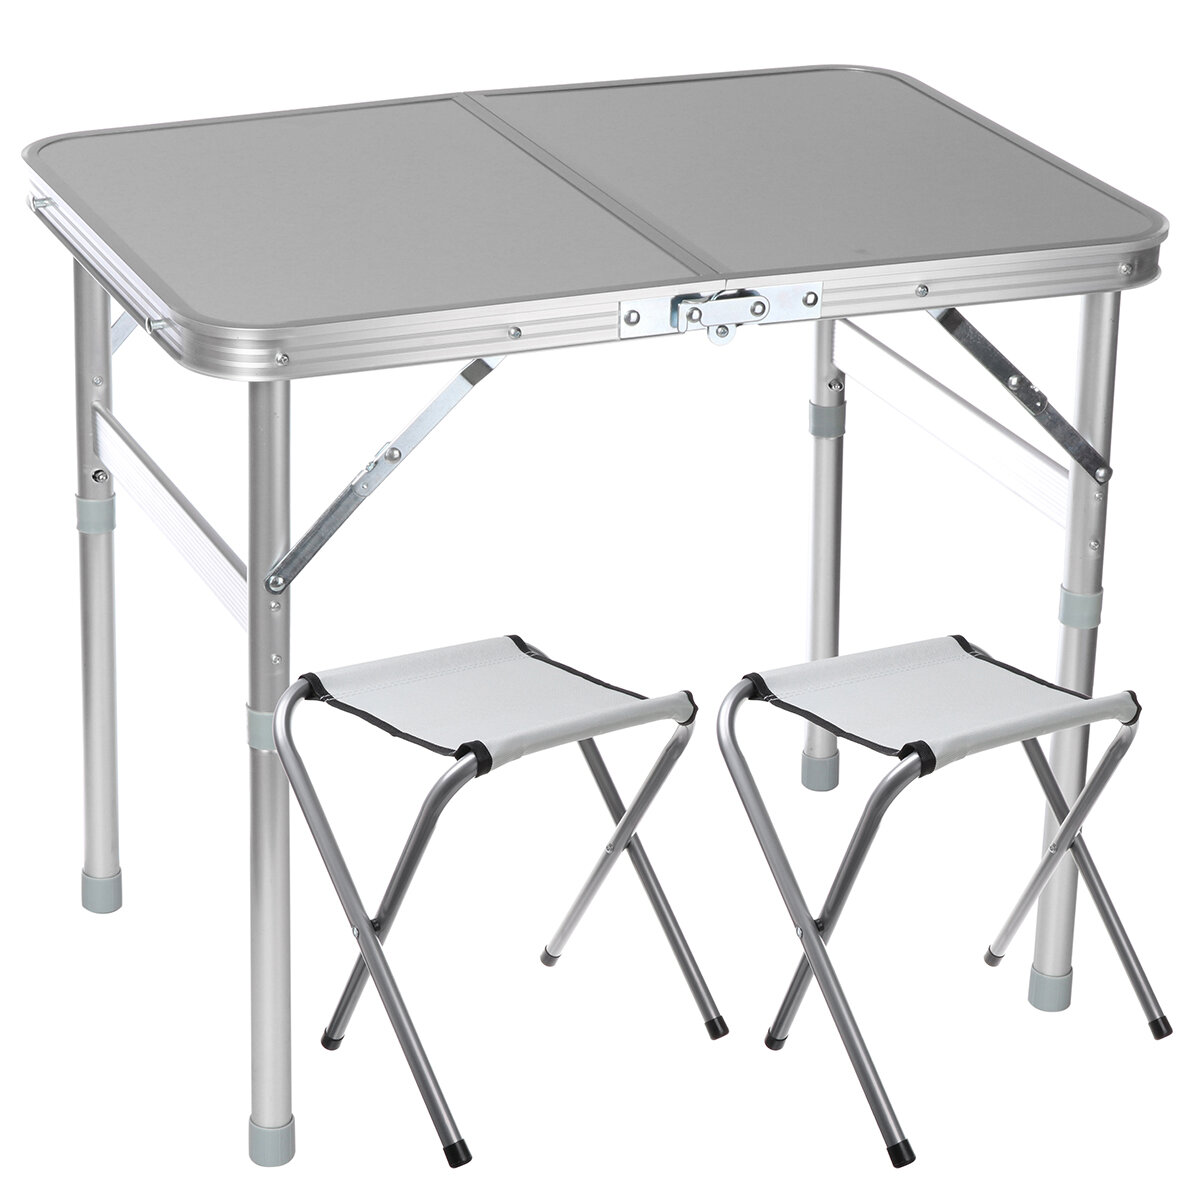 Foldable Desk with 2 Chairs Folding Picnic Table with 2 Stools Aluminum Laptop Desk Chair Set Height Adjustable Portable